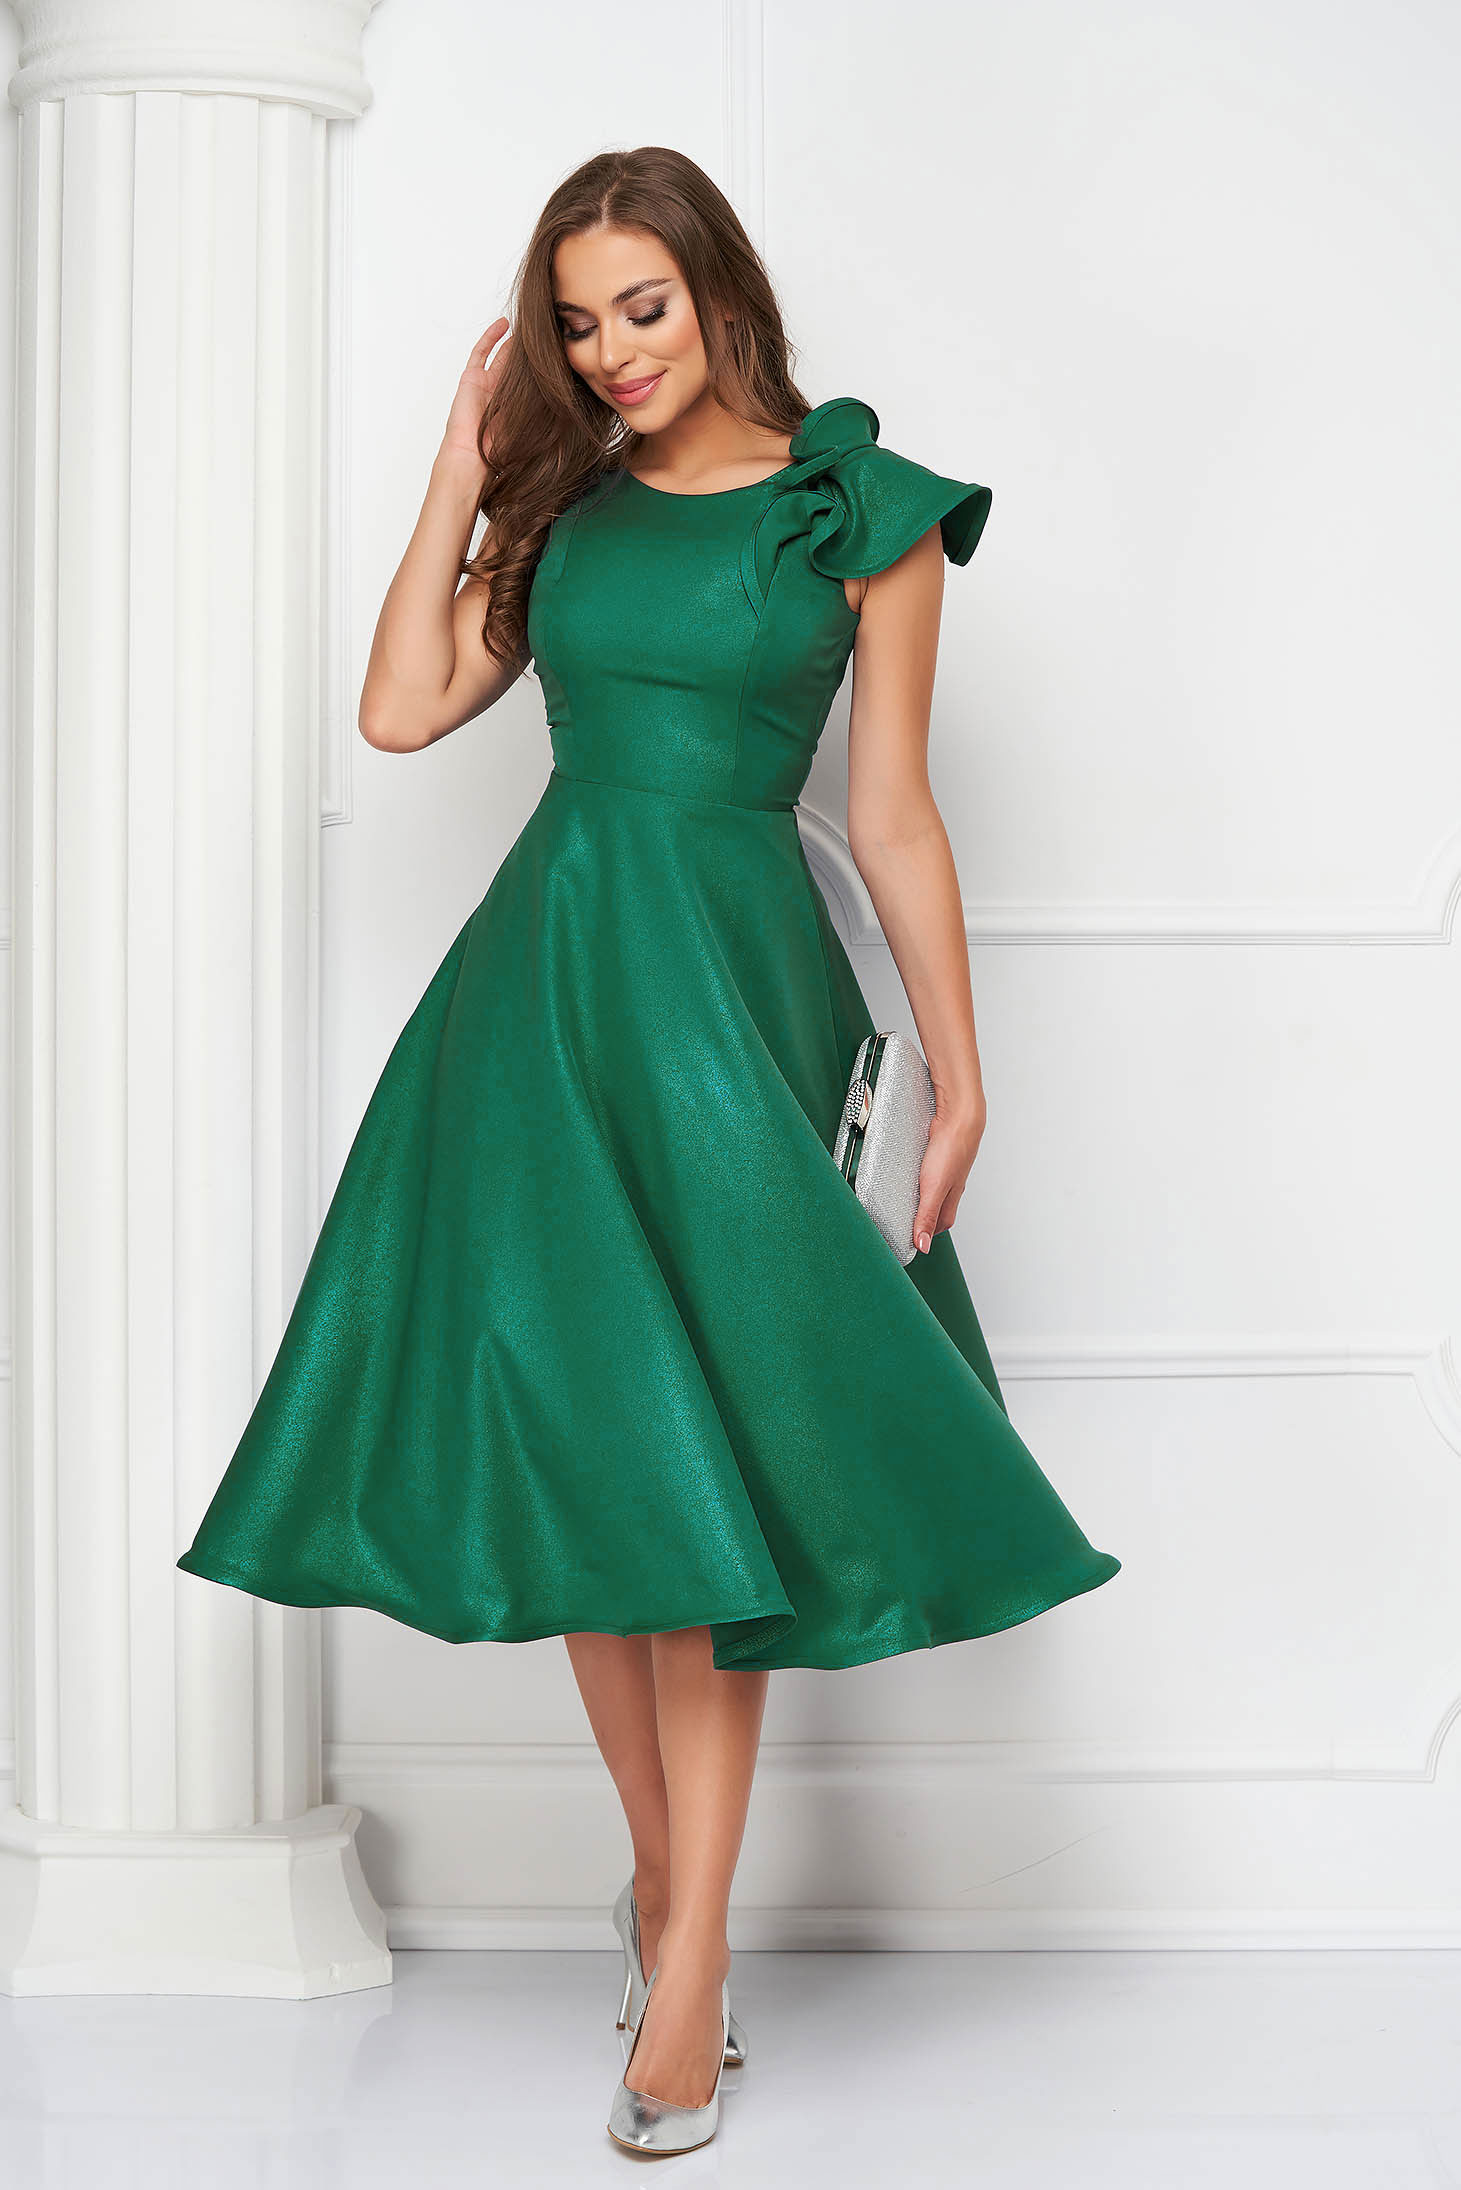 Green Elastic Fabric Dress with Ruffles on the Shoulder - StarShinerS 4 - StarShinerS.com